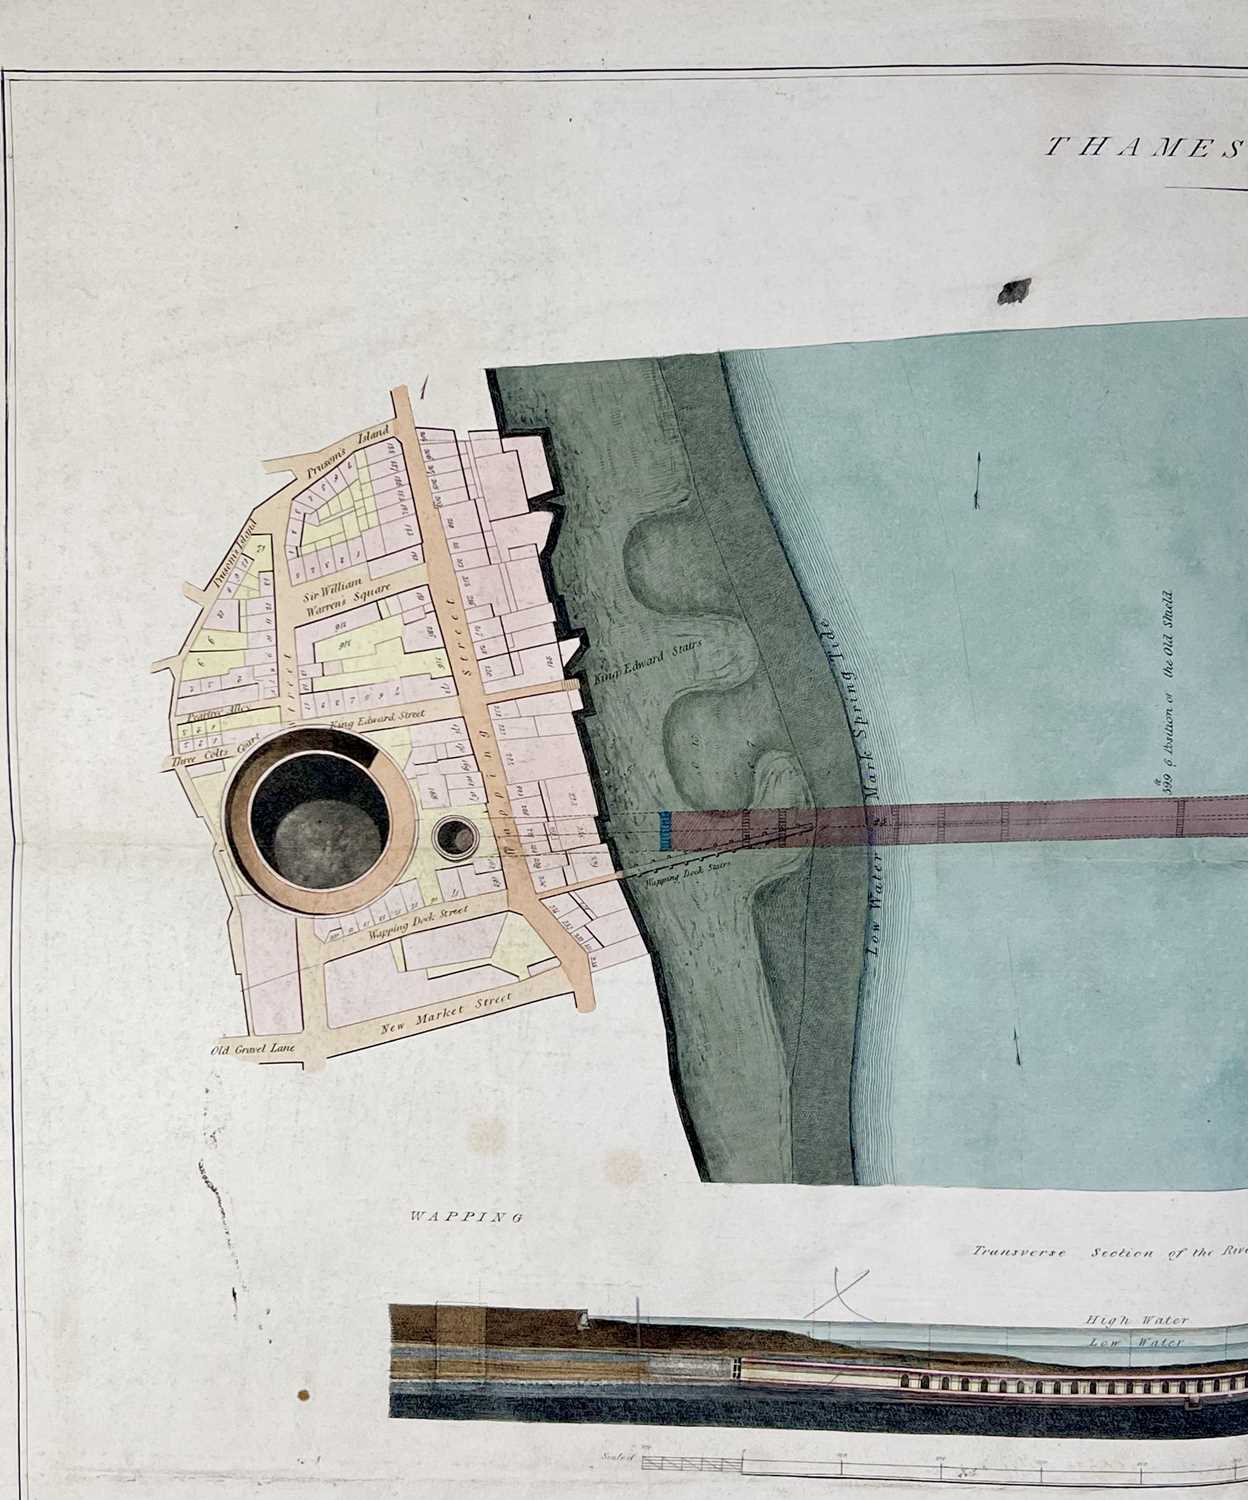 MARC ISAMBARD BRUNEL. 'The Thames Tunnel linking Wapping and Rotherhithe,' hand-coloured engraving - Image 3 of 5